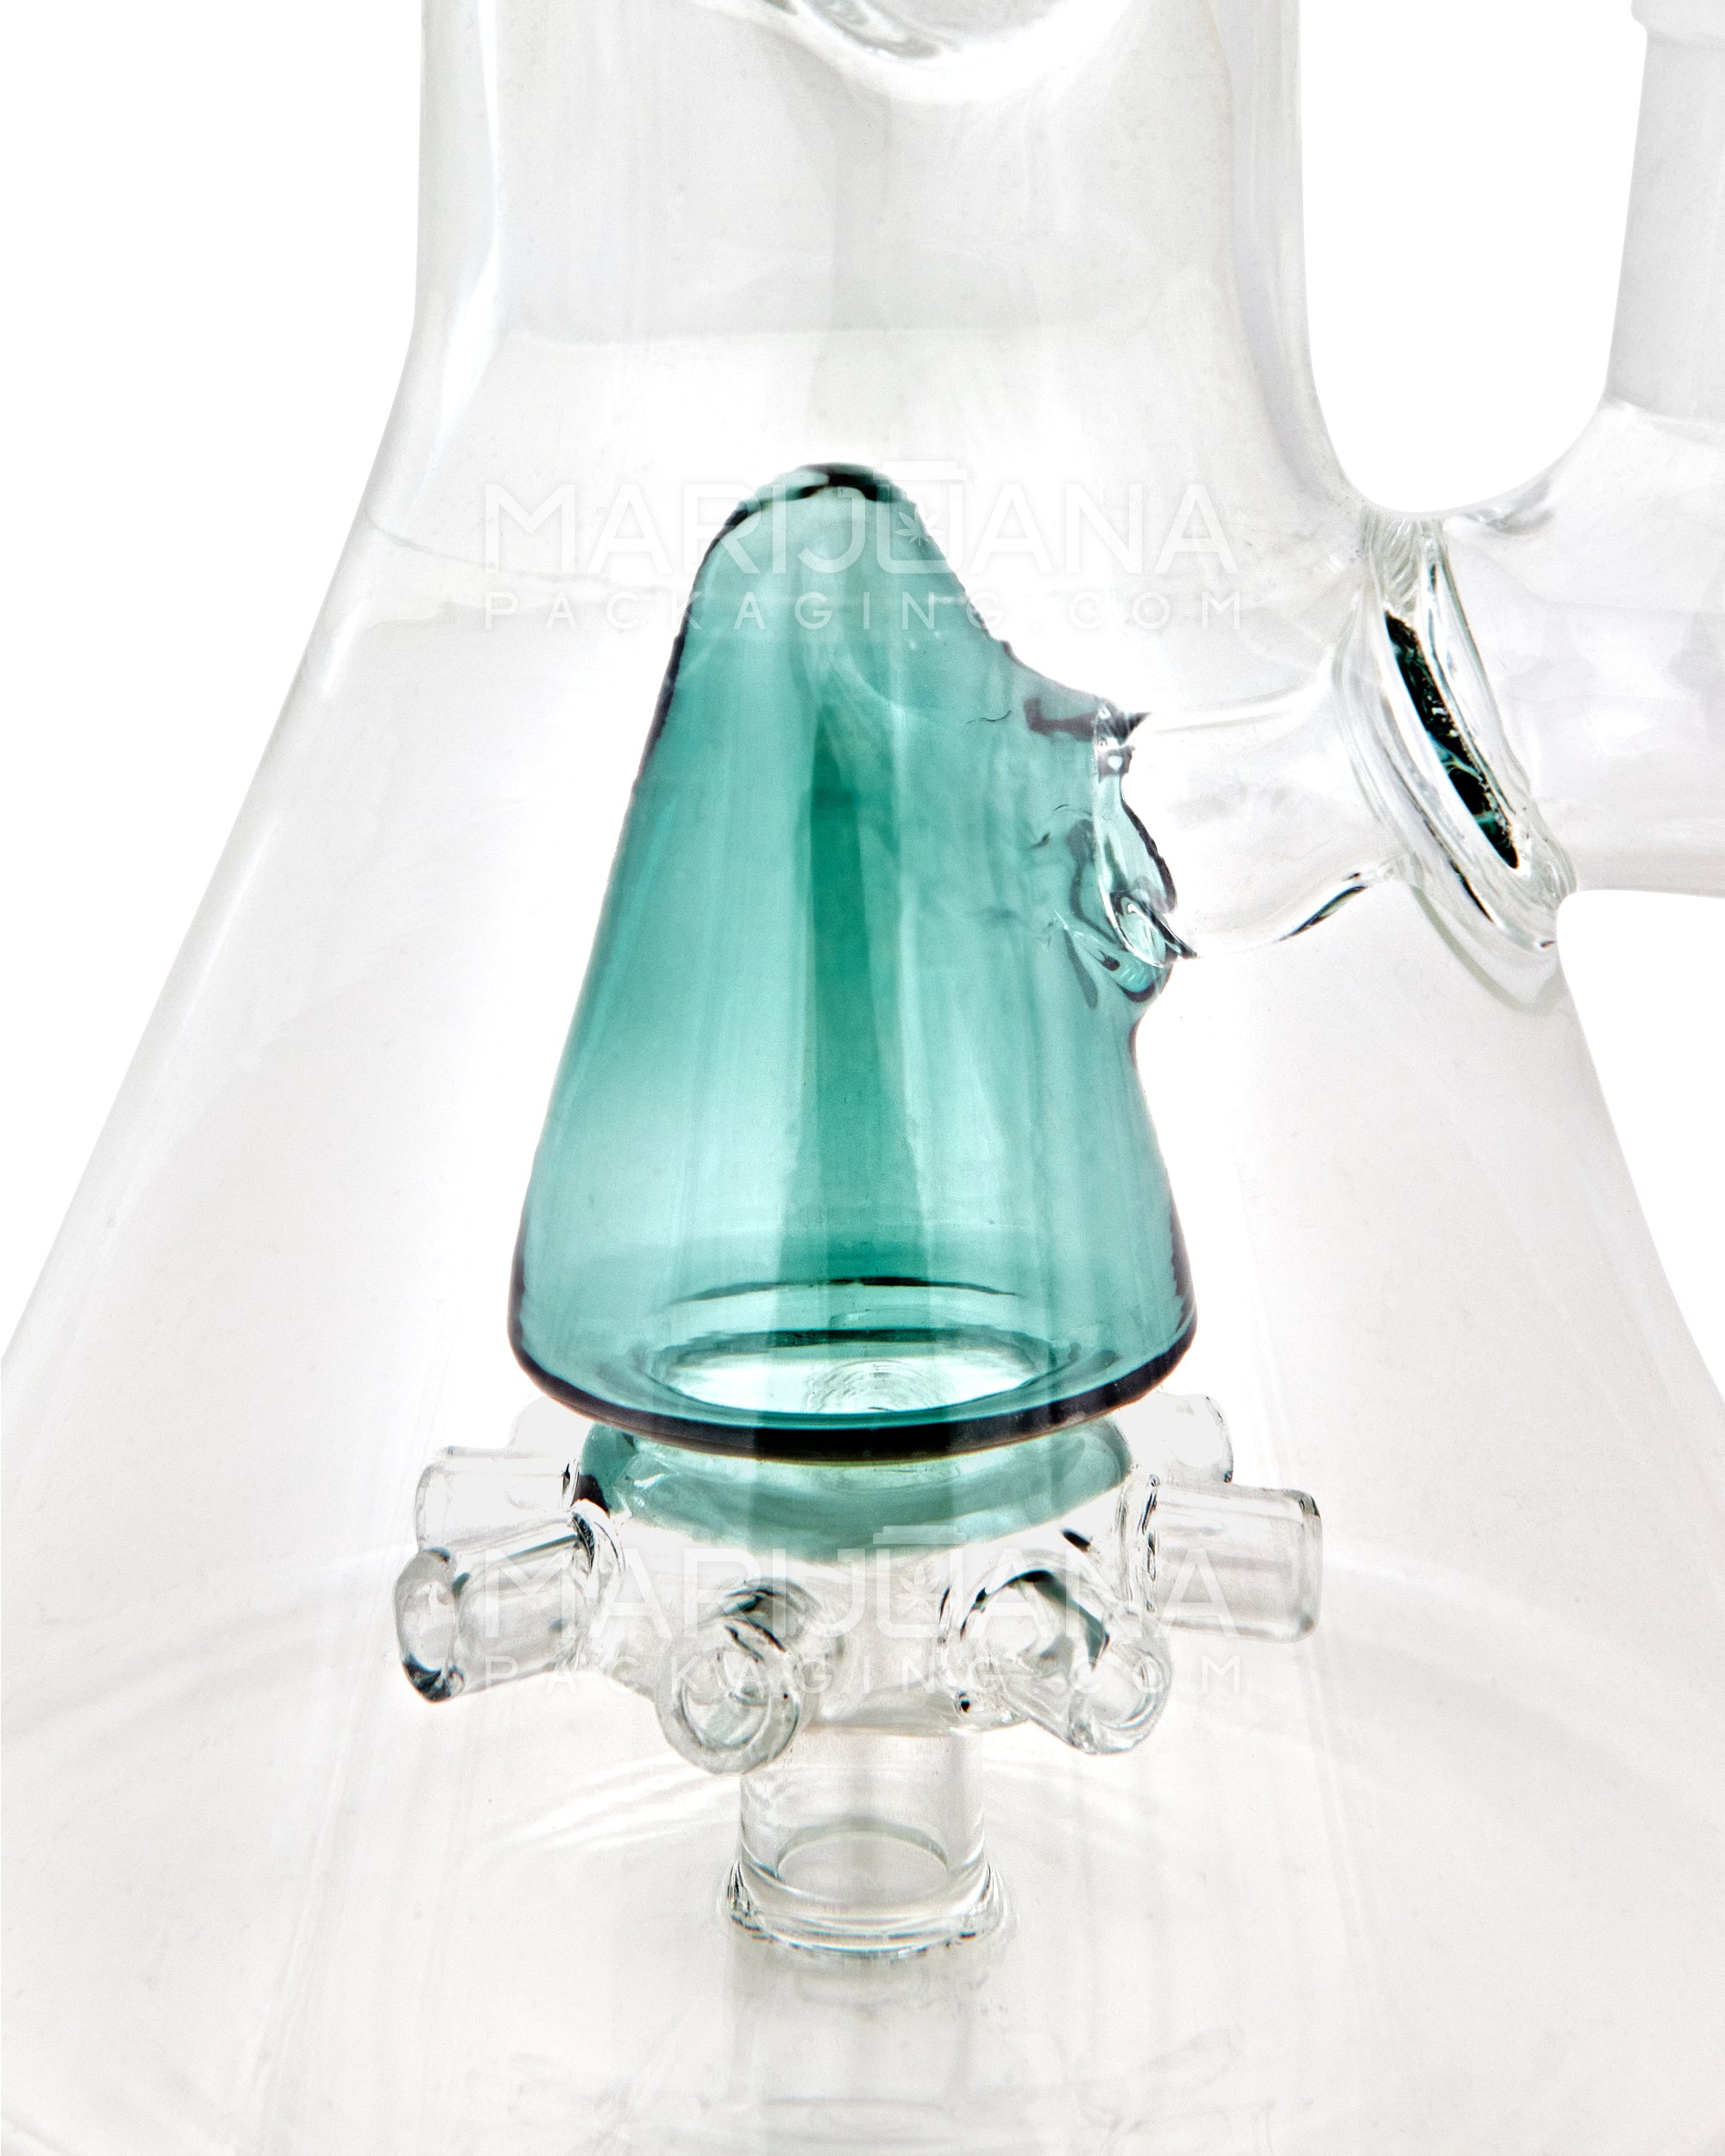 Straight Neck Atomic Perc Glass Beaker Water Pipe w/ Ice Catcher | 10in Tall - 14mm Bowl - Teal - 4